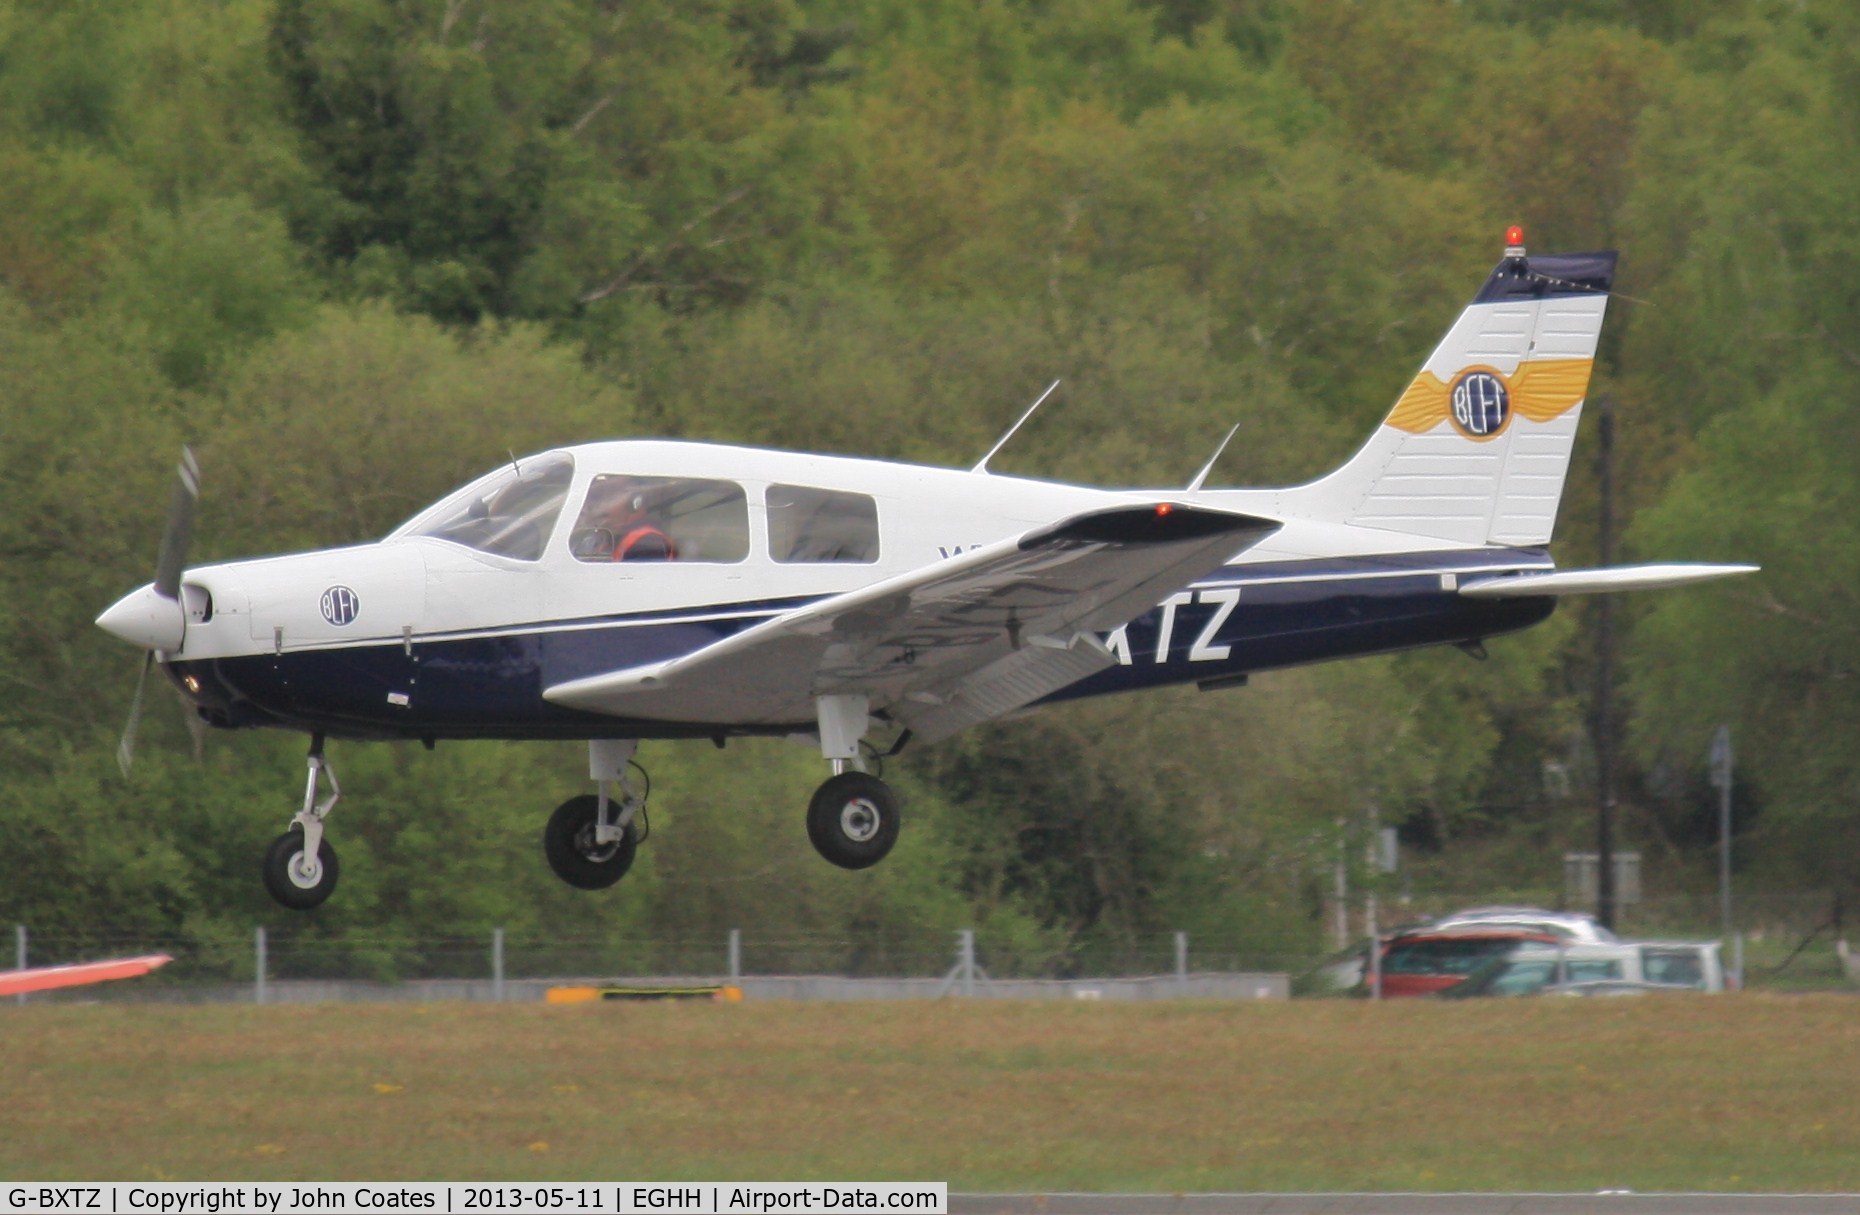 G-BXTZ, 1989 Piper PA-28-161 Cherokee Warrior II C/N 2841181, About to touchdown